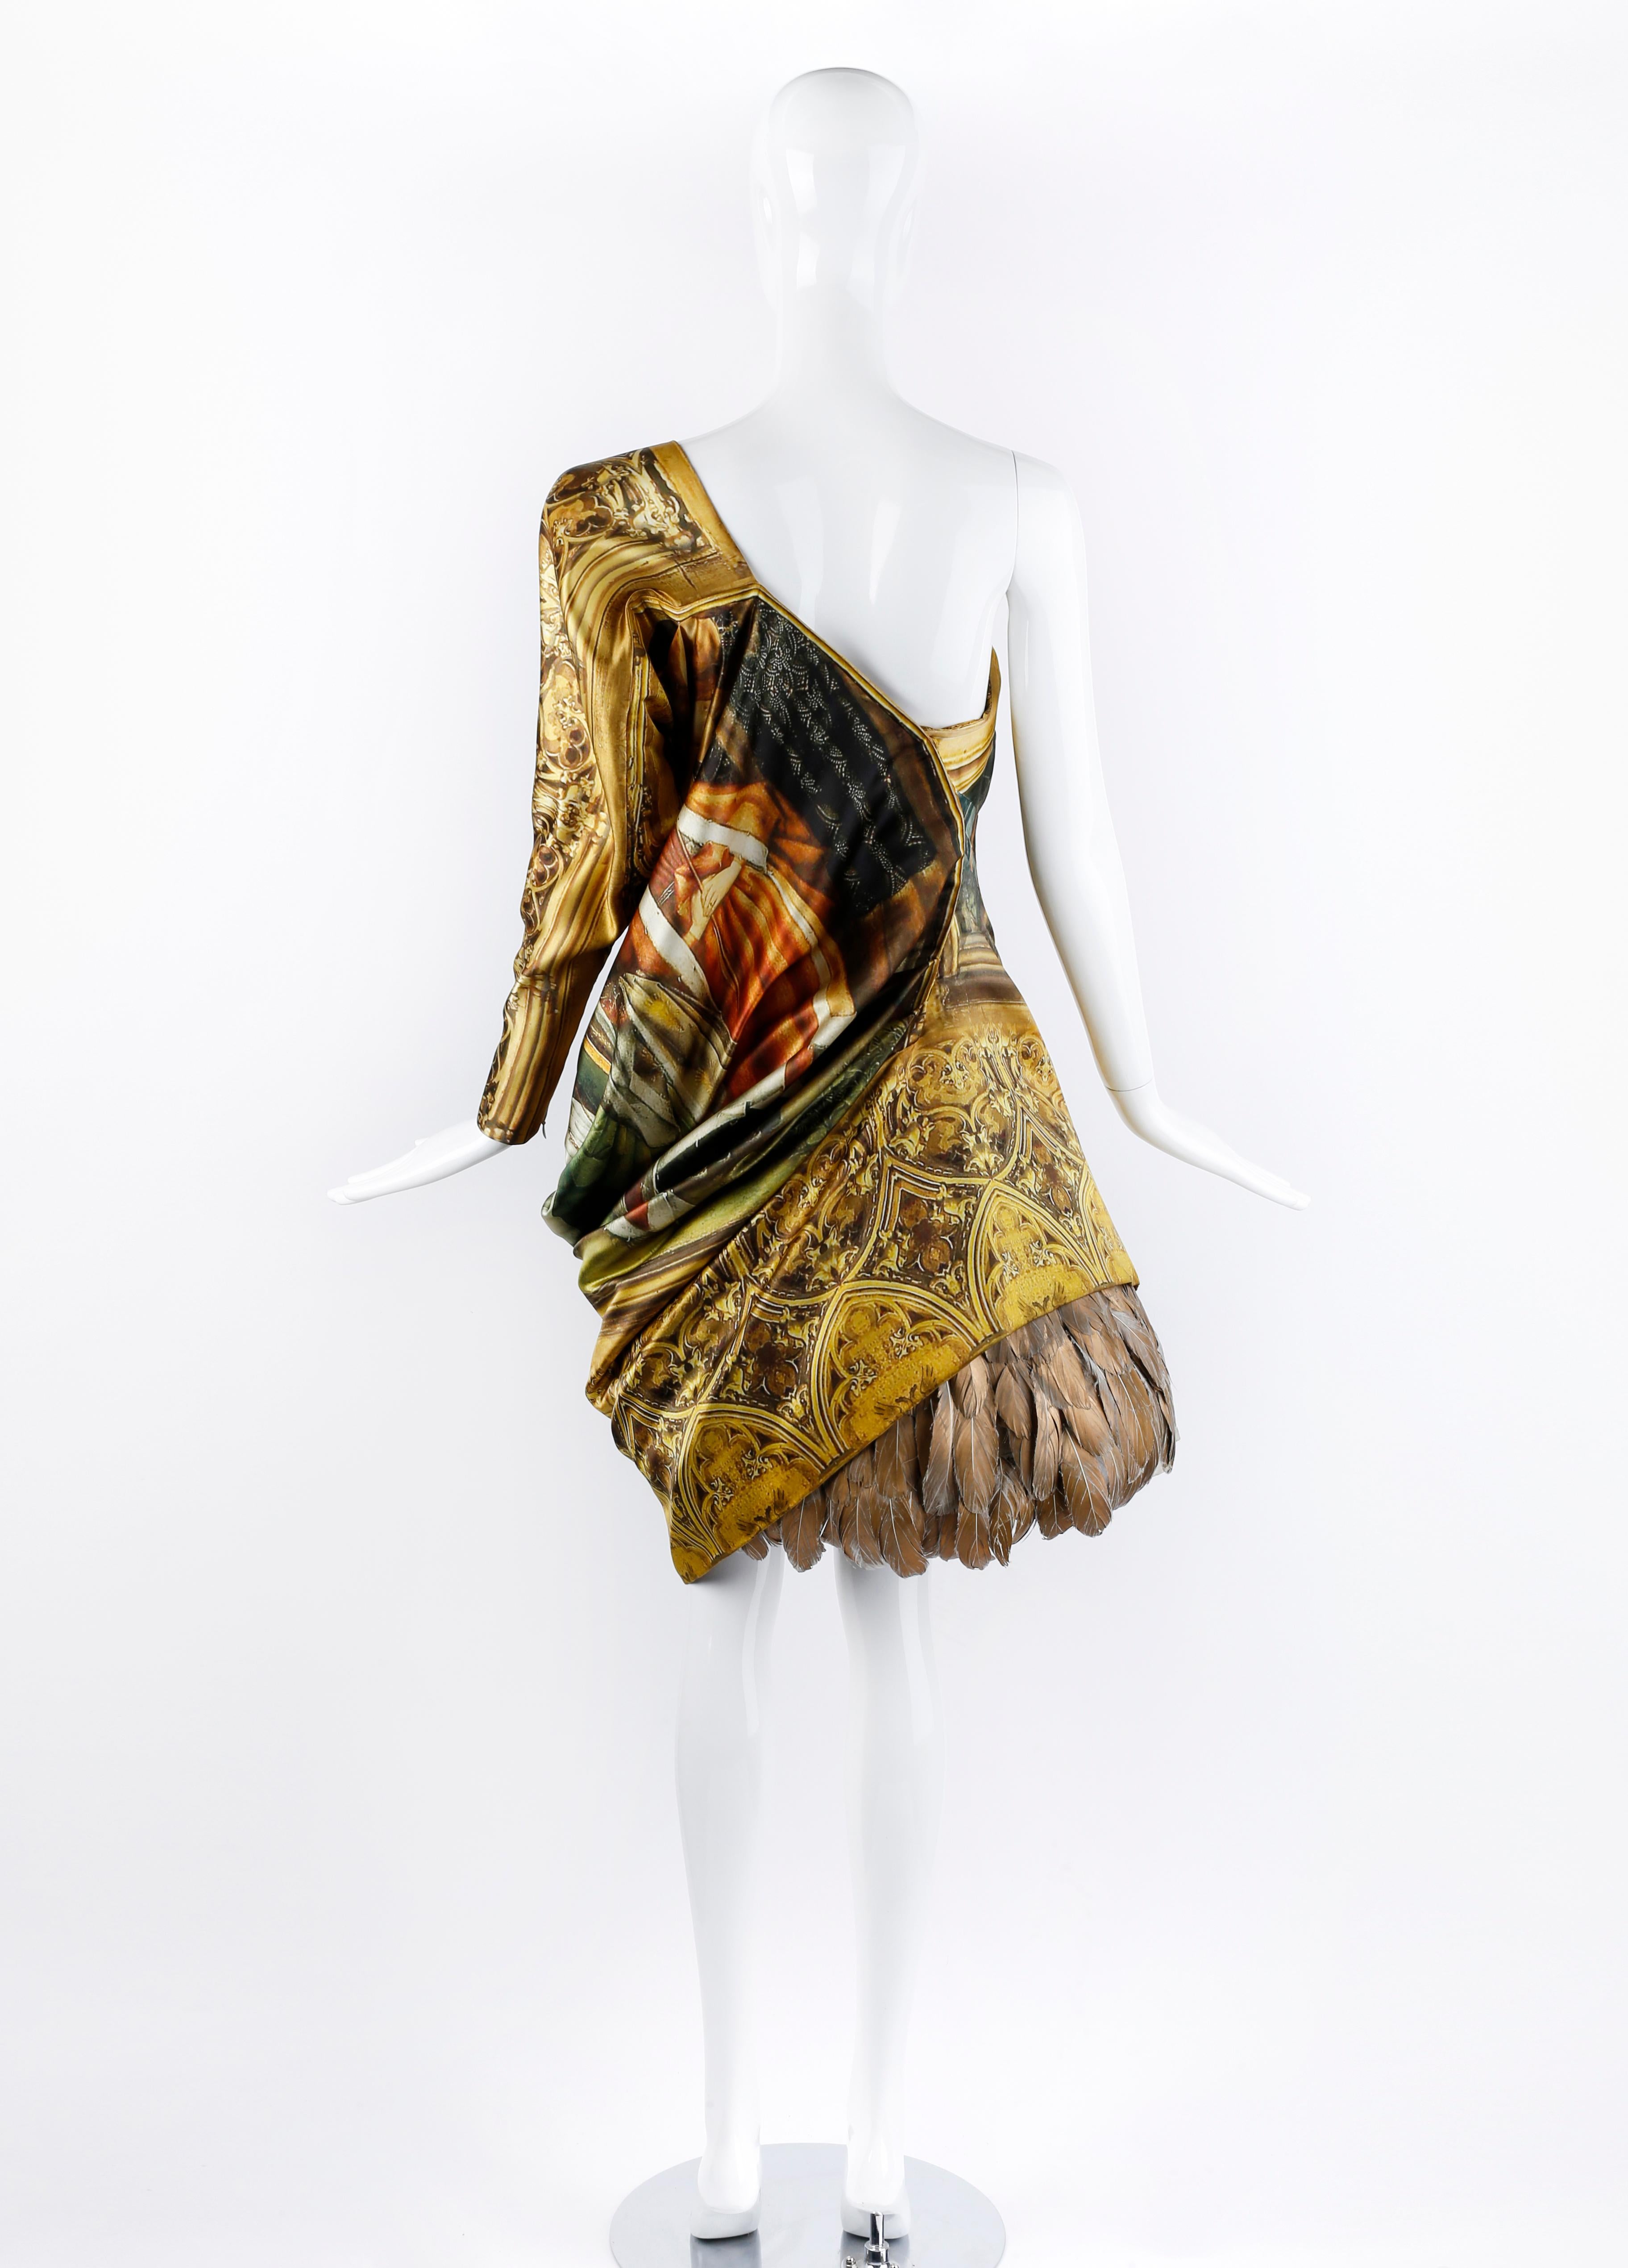 Brown Alexander McQueen F/W 2010 “Angels & Demons” Medieval Art Royalty Gown Dress For Sale